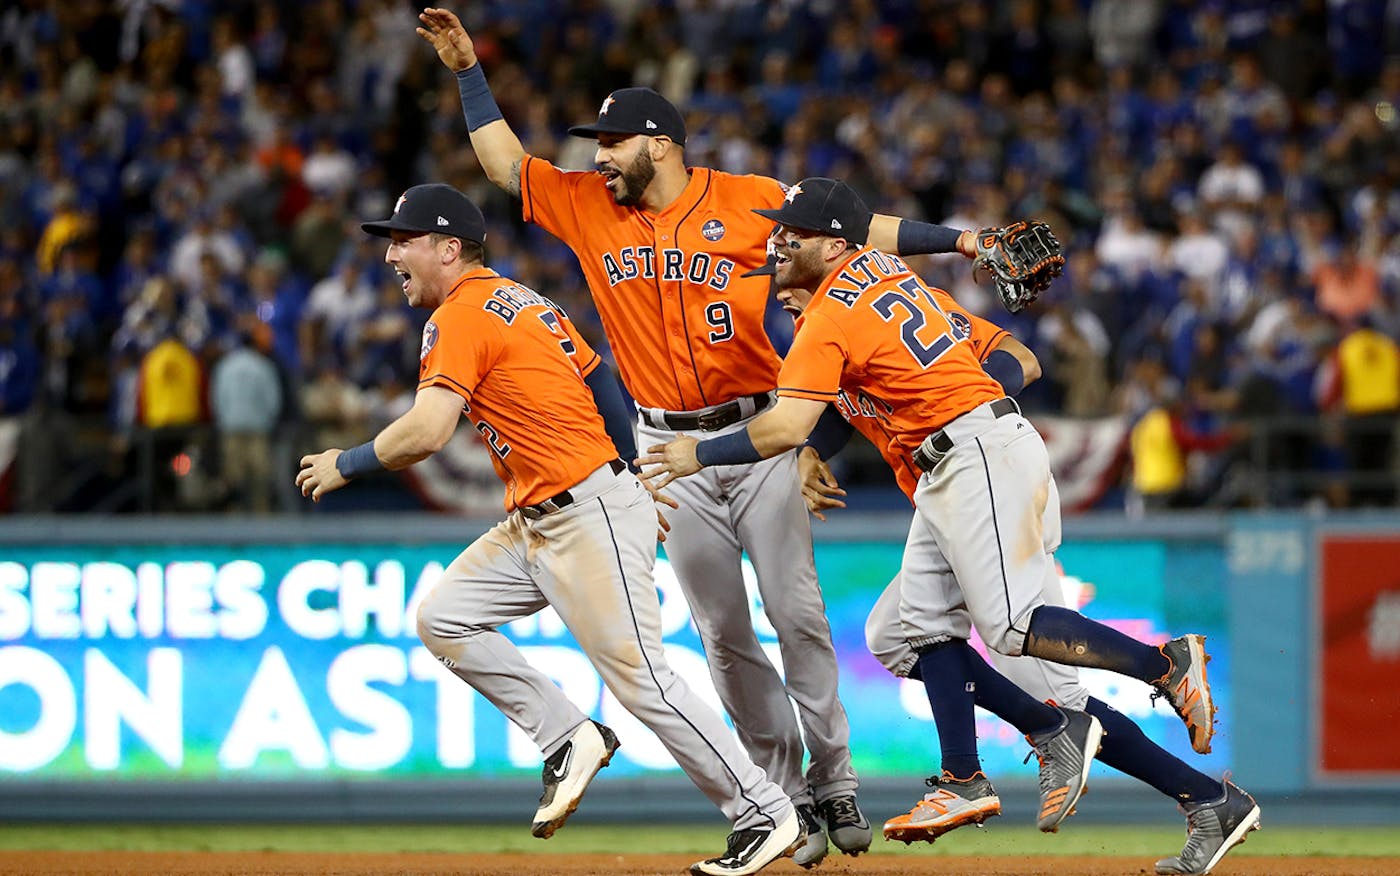 Alex Bregman Is The Star The Astros Didn't Know They'd Need